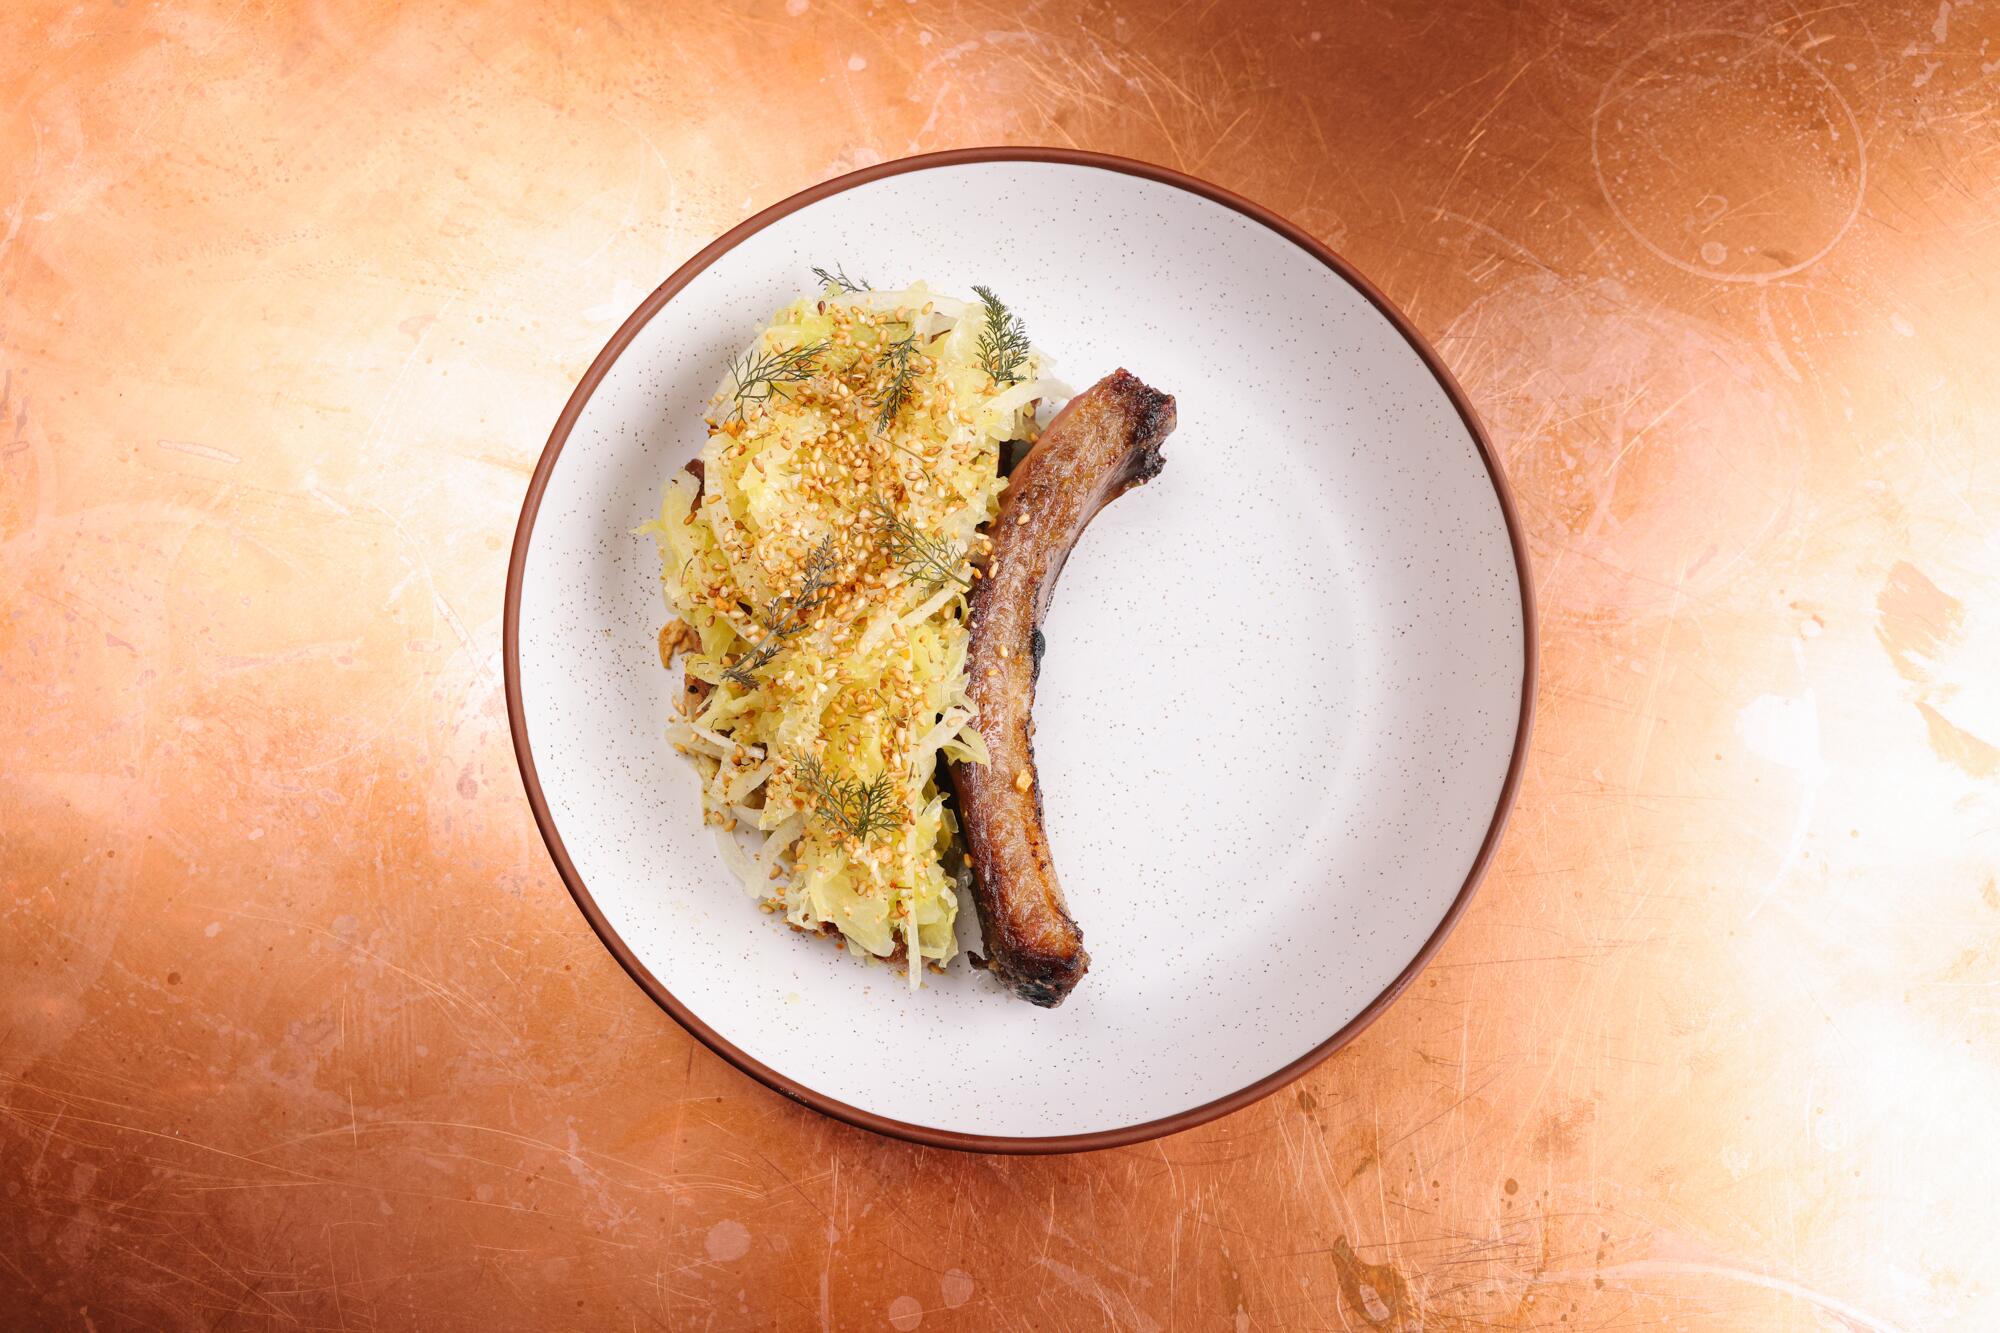 The Ibérico Pork Chop dish with cabbage and fennel pollen furikake is seen at Bar Chelou.